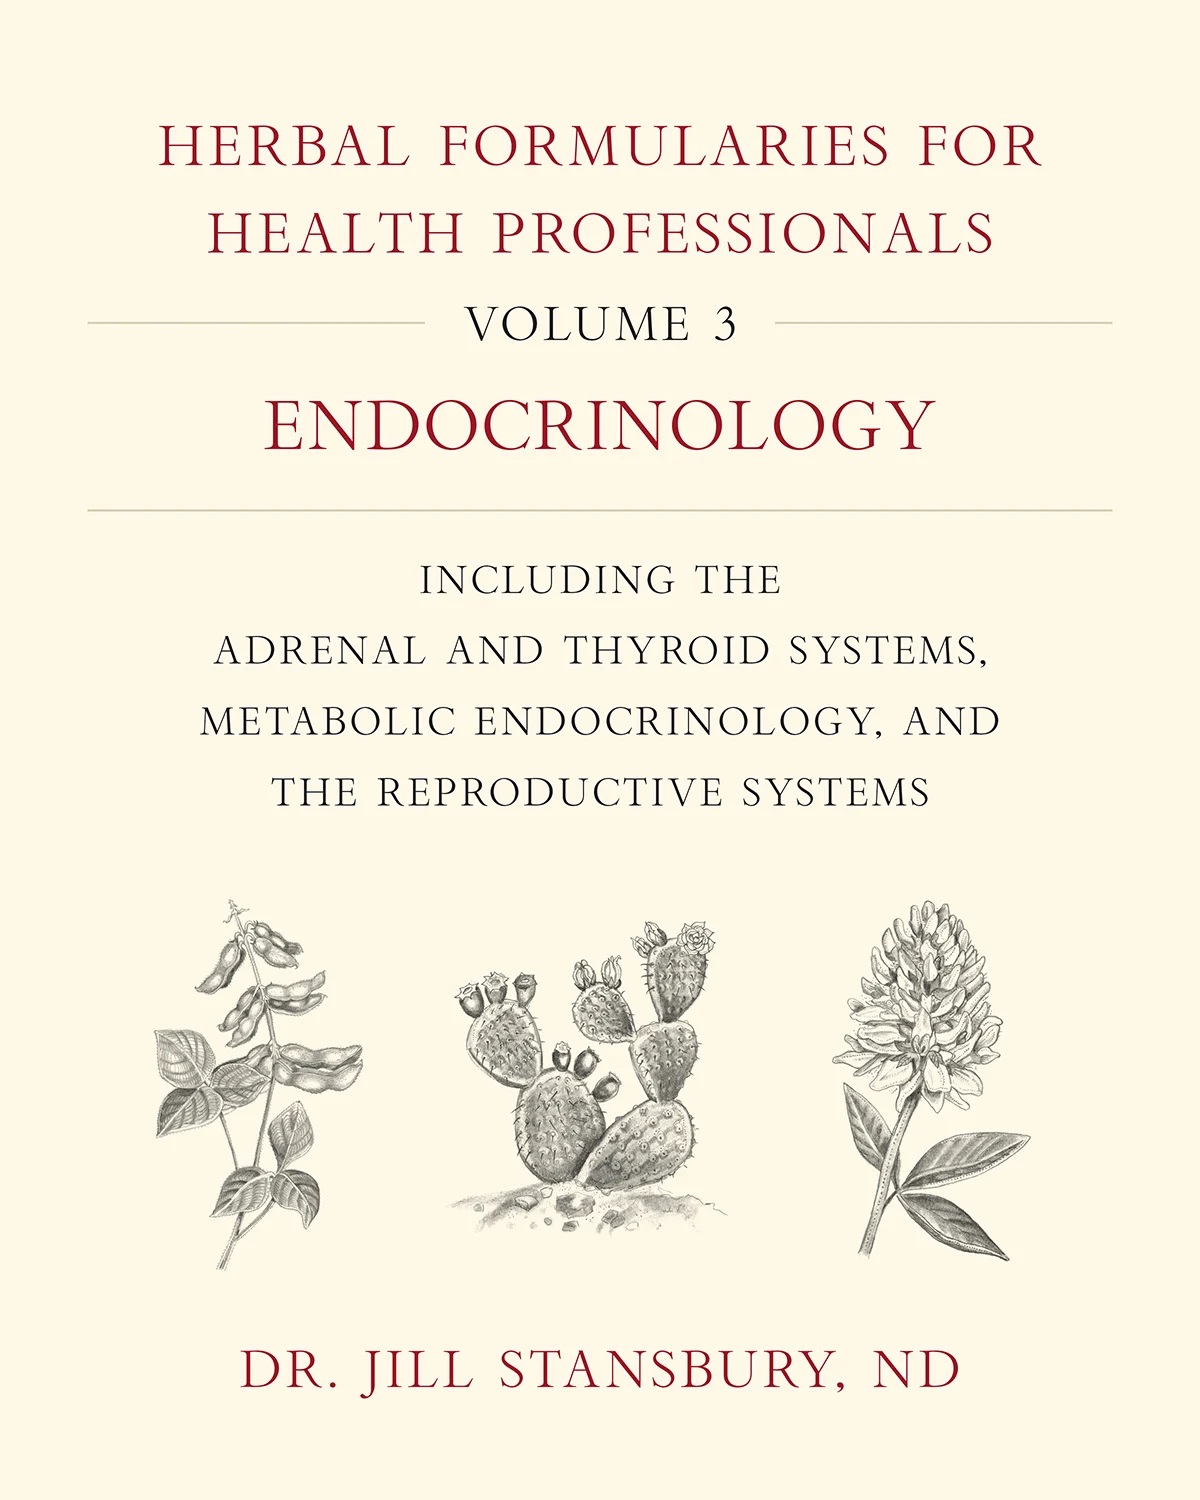 Herbal Formularies for Health Professionials, Volume 3: Endocrinology